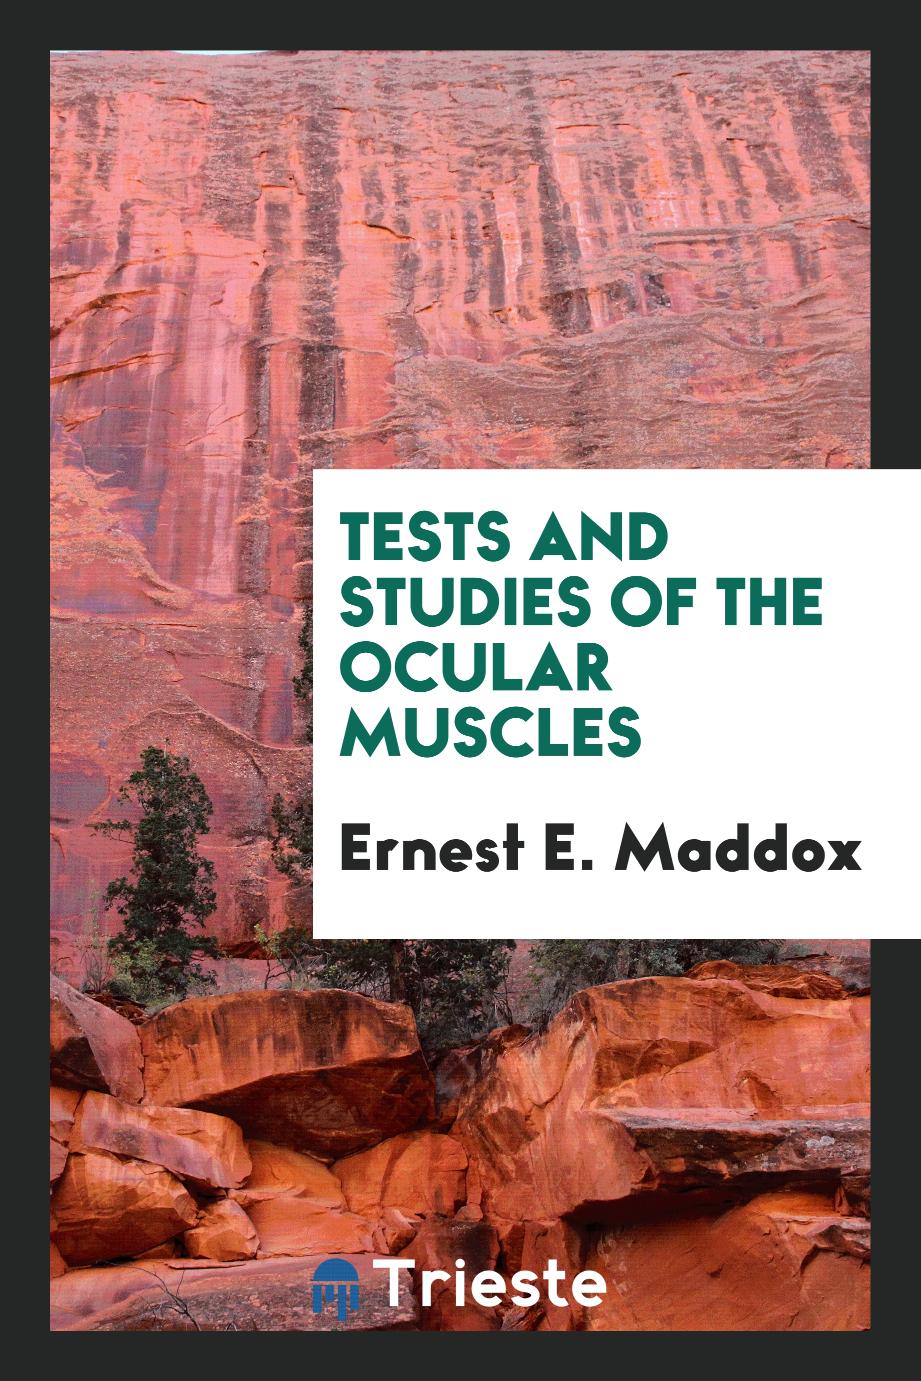 Tests and studies of the ocular muscles